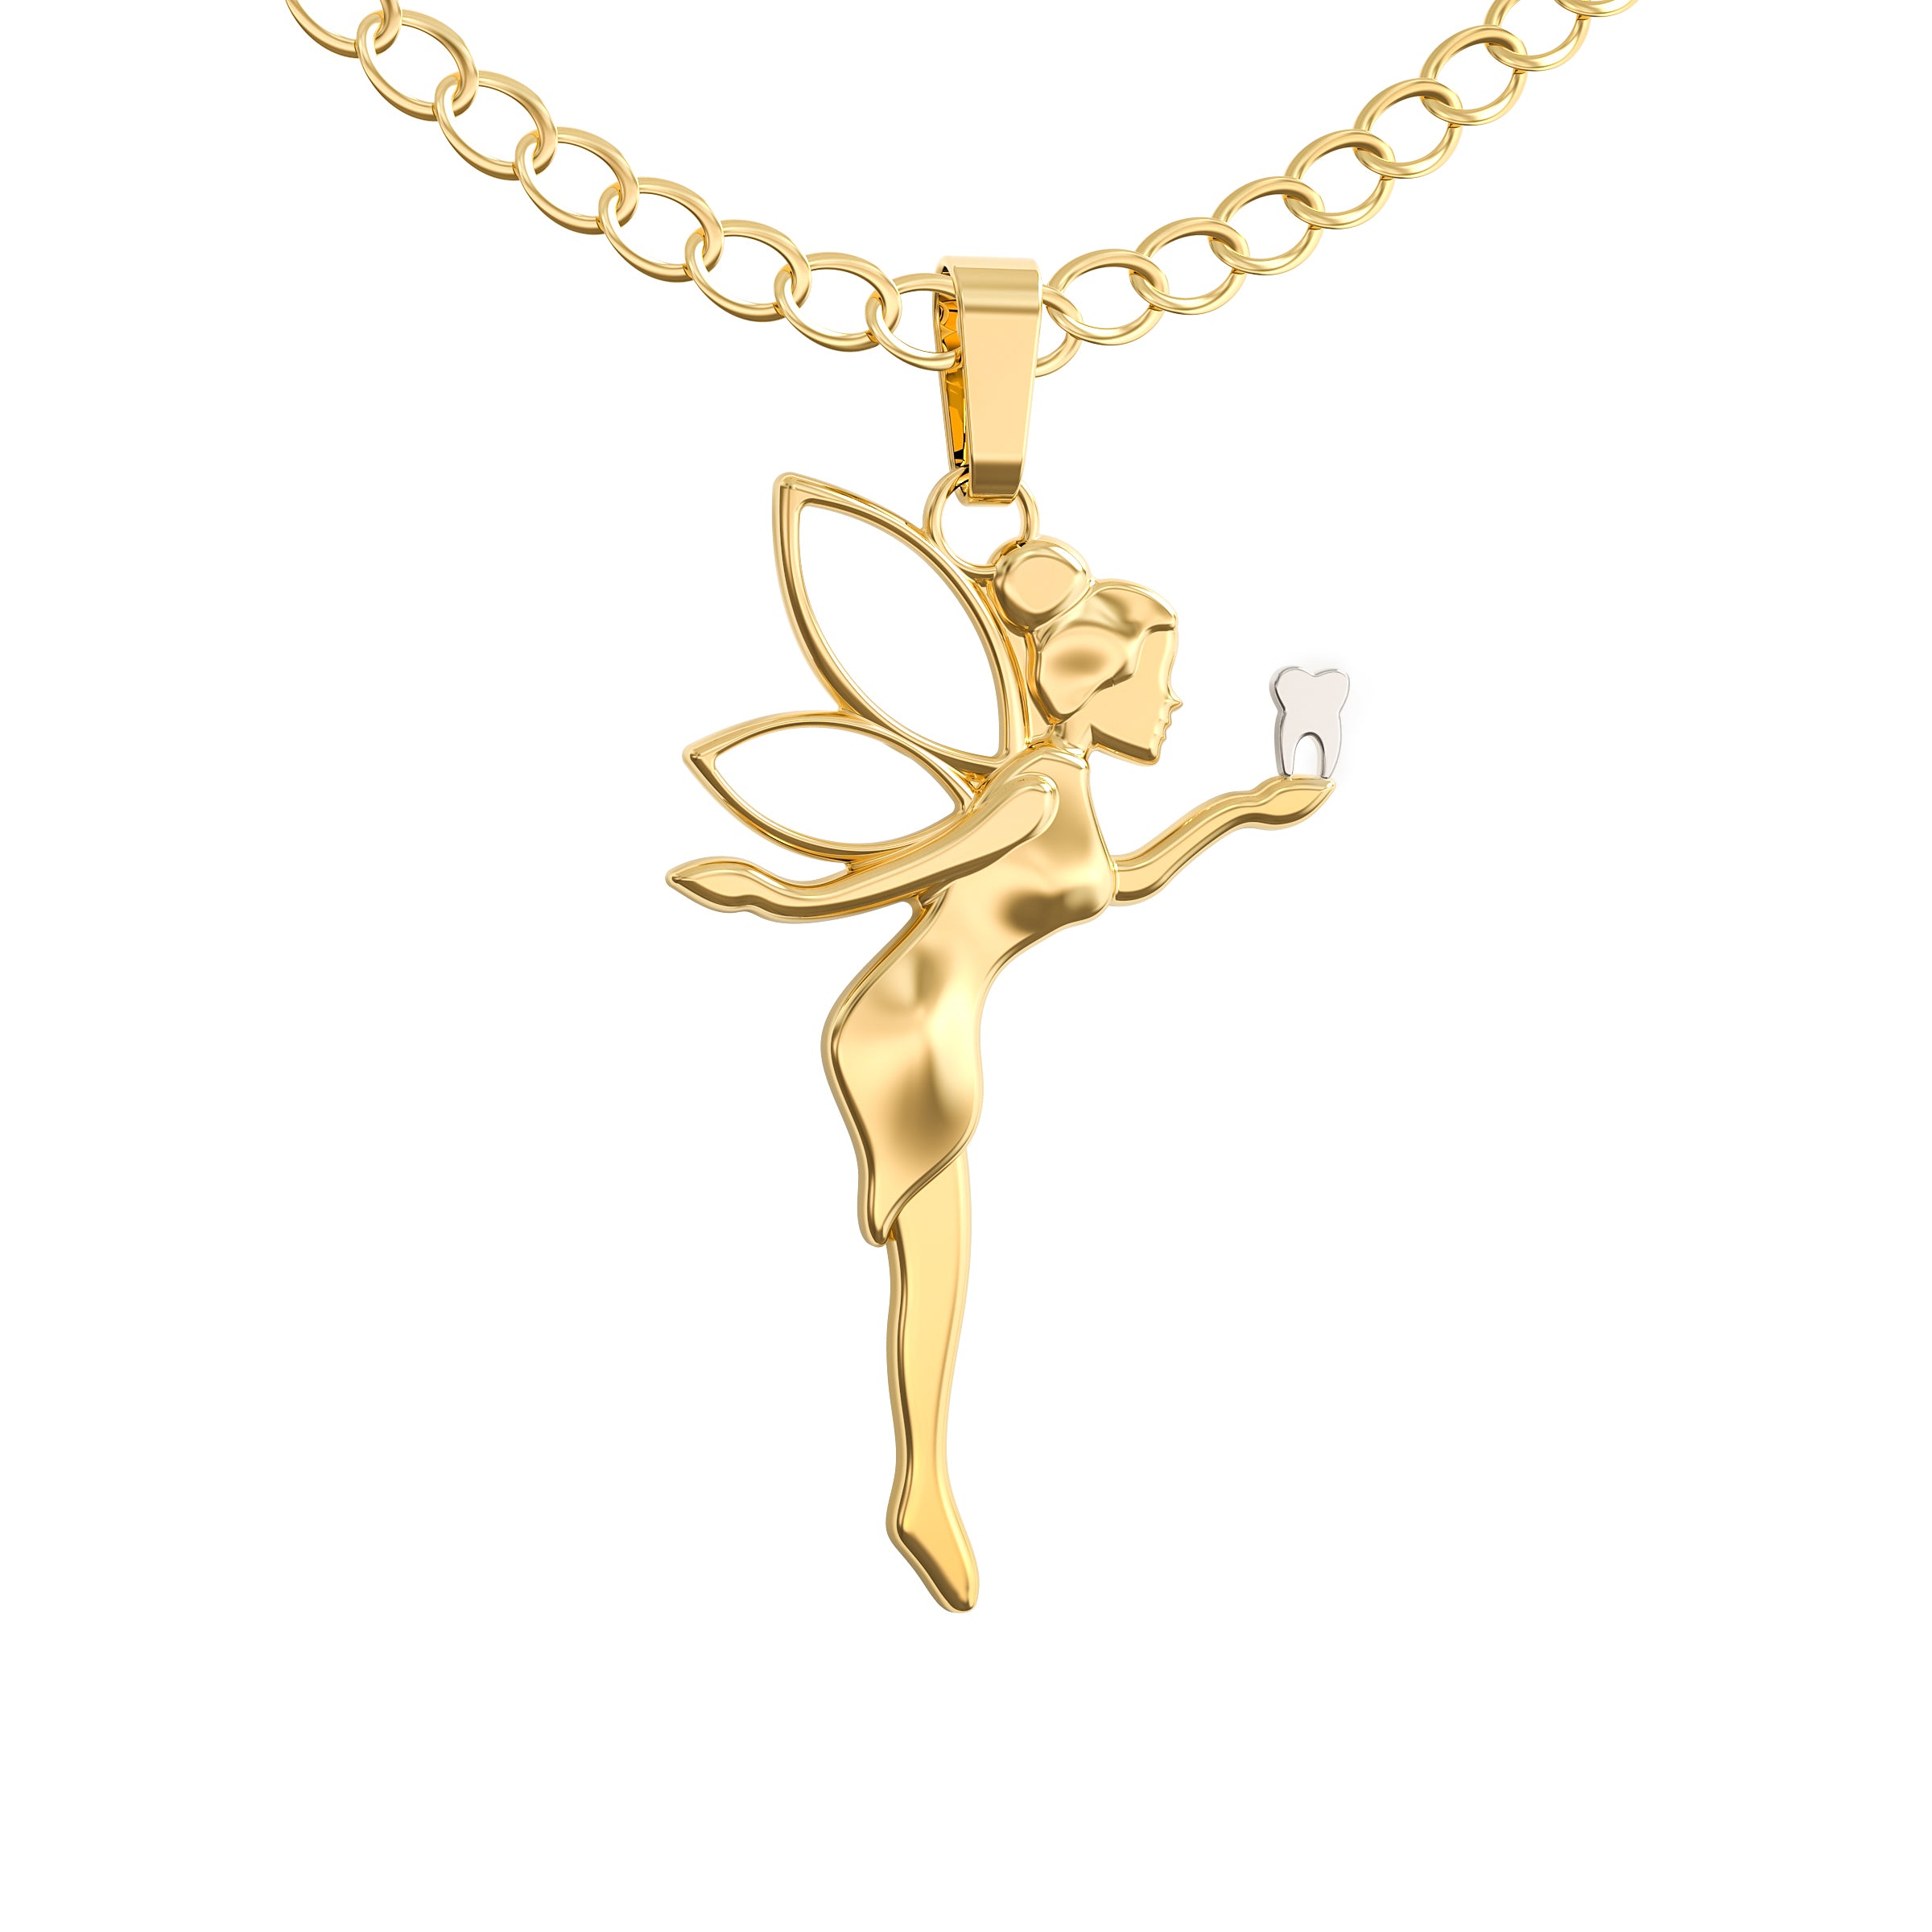 Parsons Gifts - The Necklace Fairy is a jewelry clasp helper that